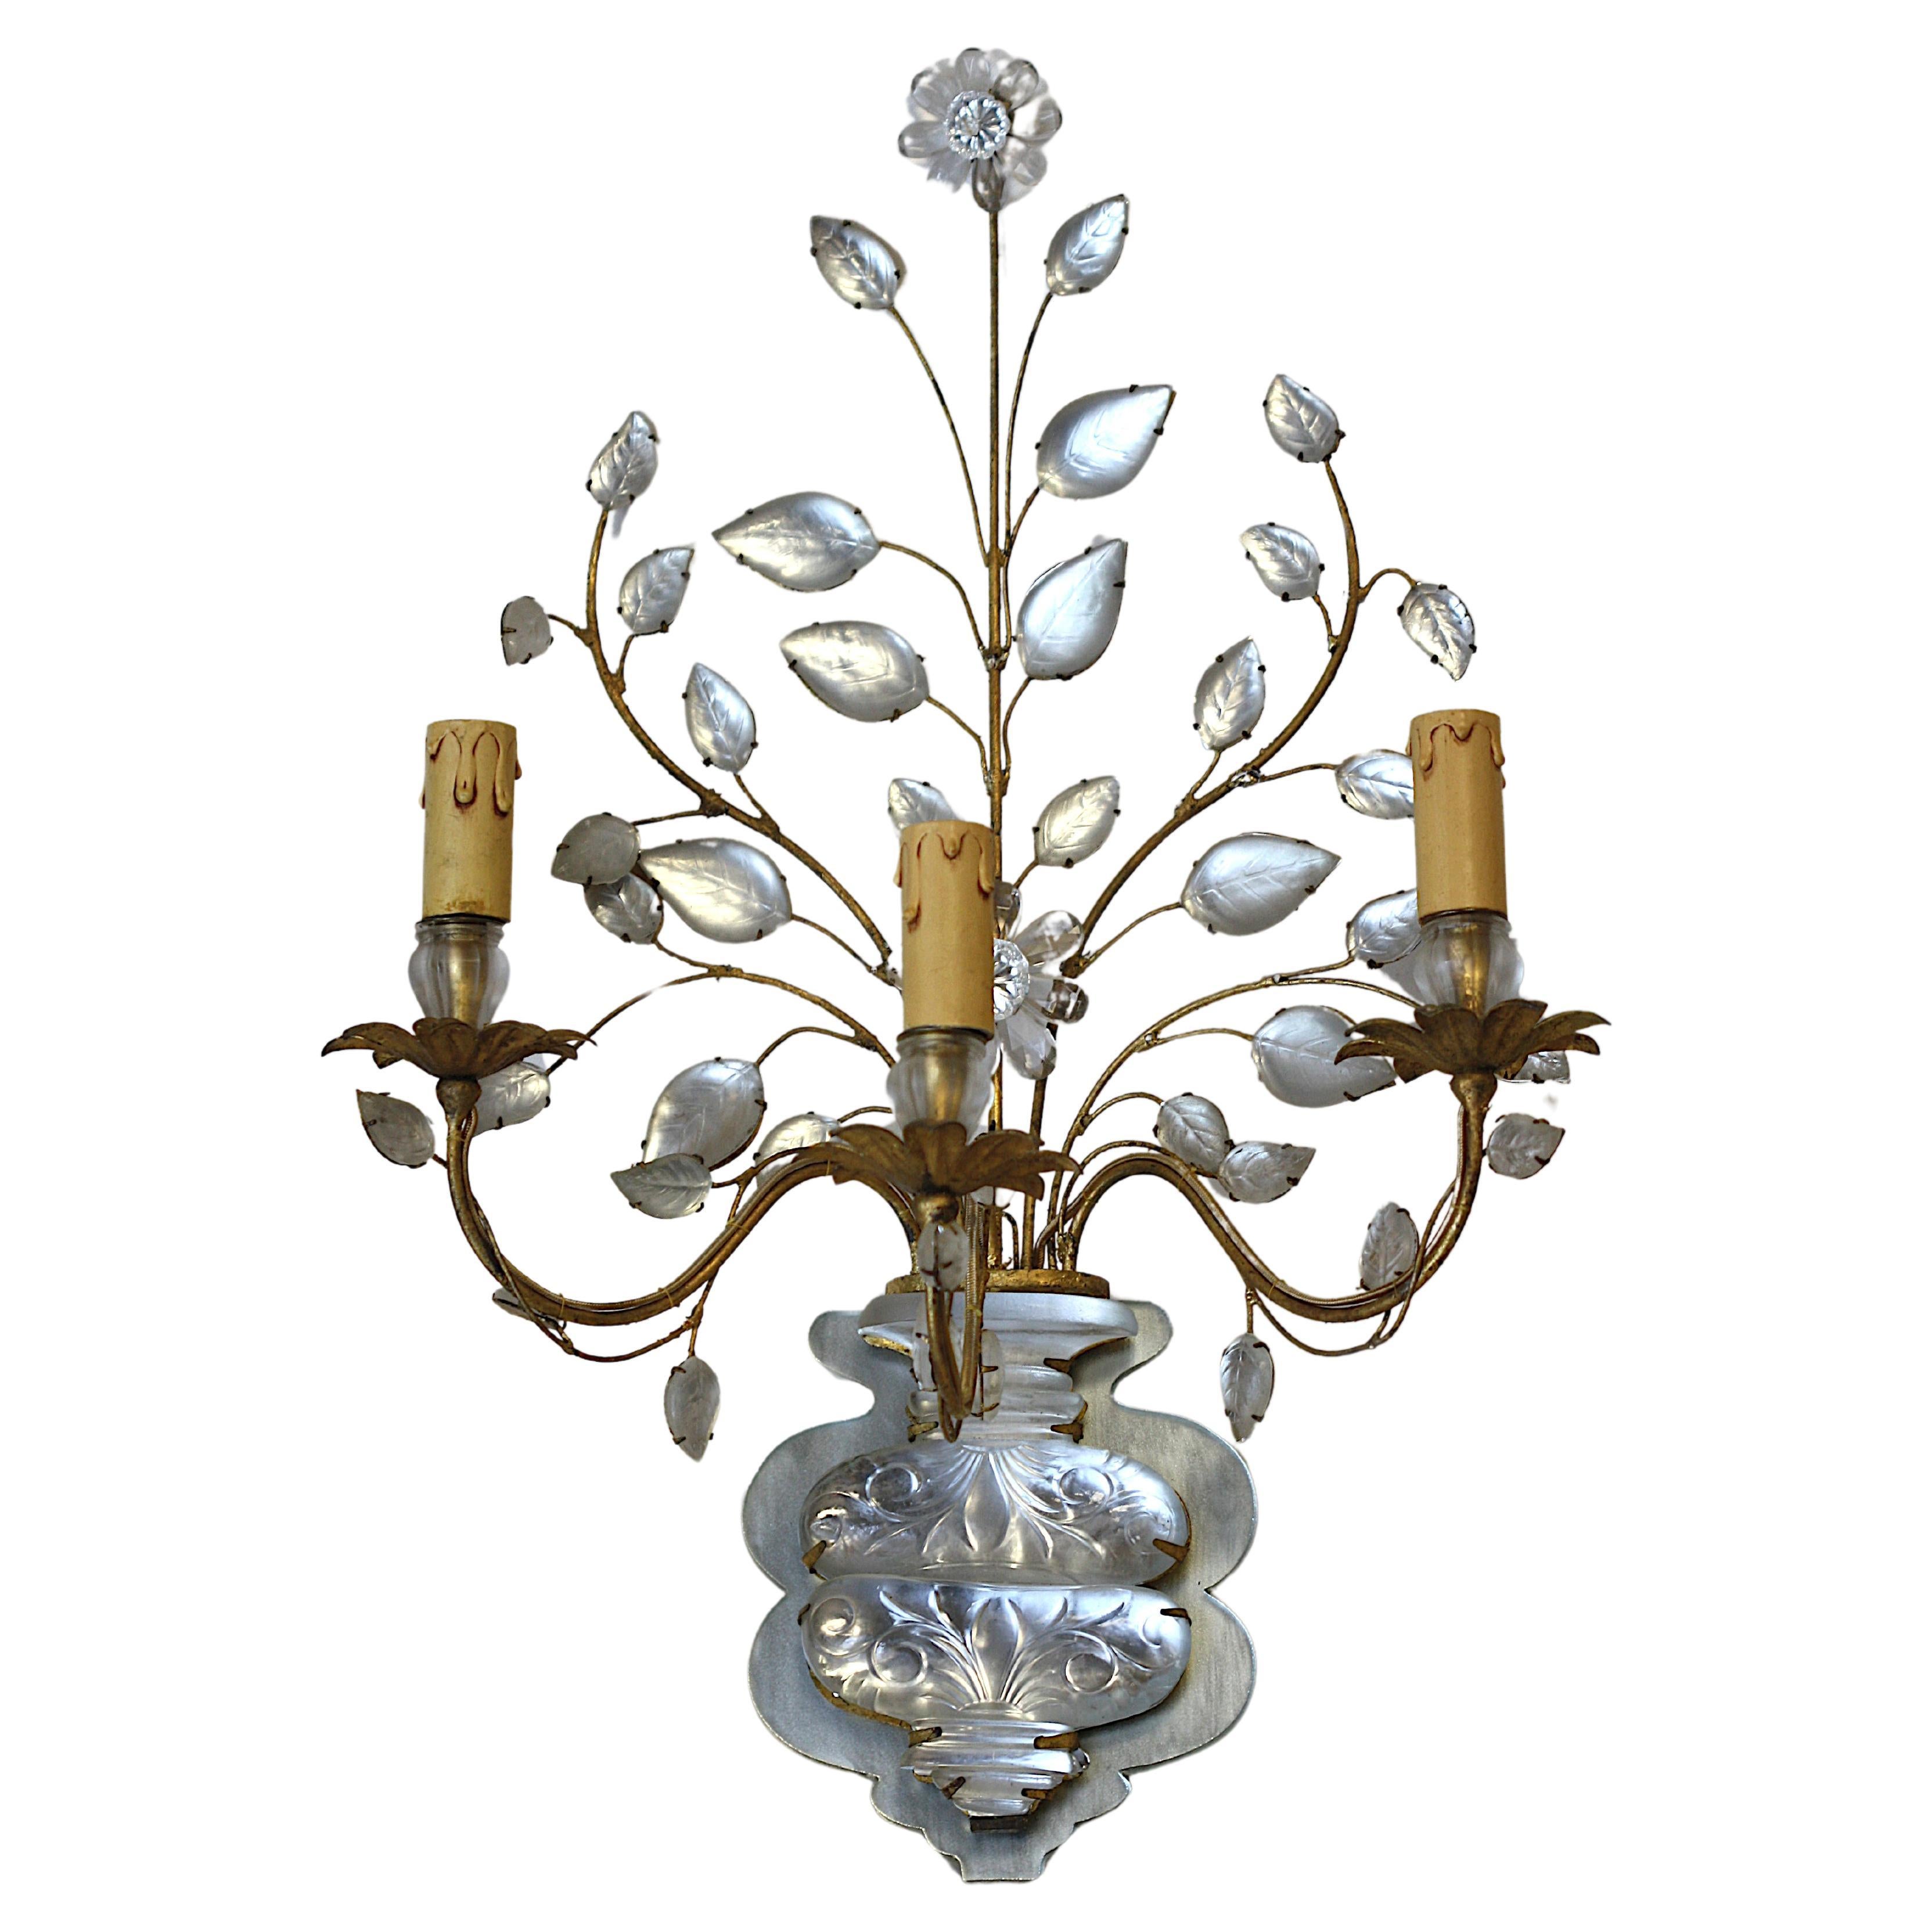 
Pair of Italian Rock Crystal and Gilt Metal Three-Light Wall Lights 
The mirrored and vase-shaped backplate supports three scrolled arms with leaf-shaped drip pans, the vase issuing a foliate spray with leaves and a flowerhead.
Height 25 in. (63.5